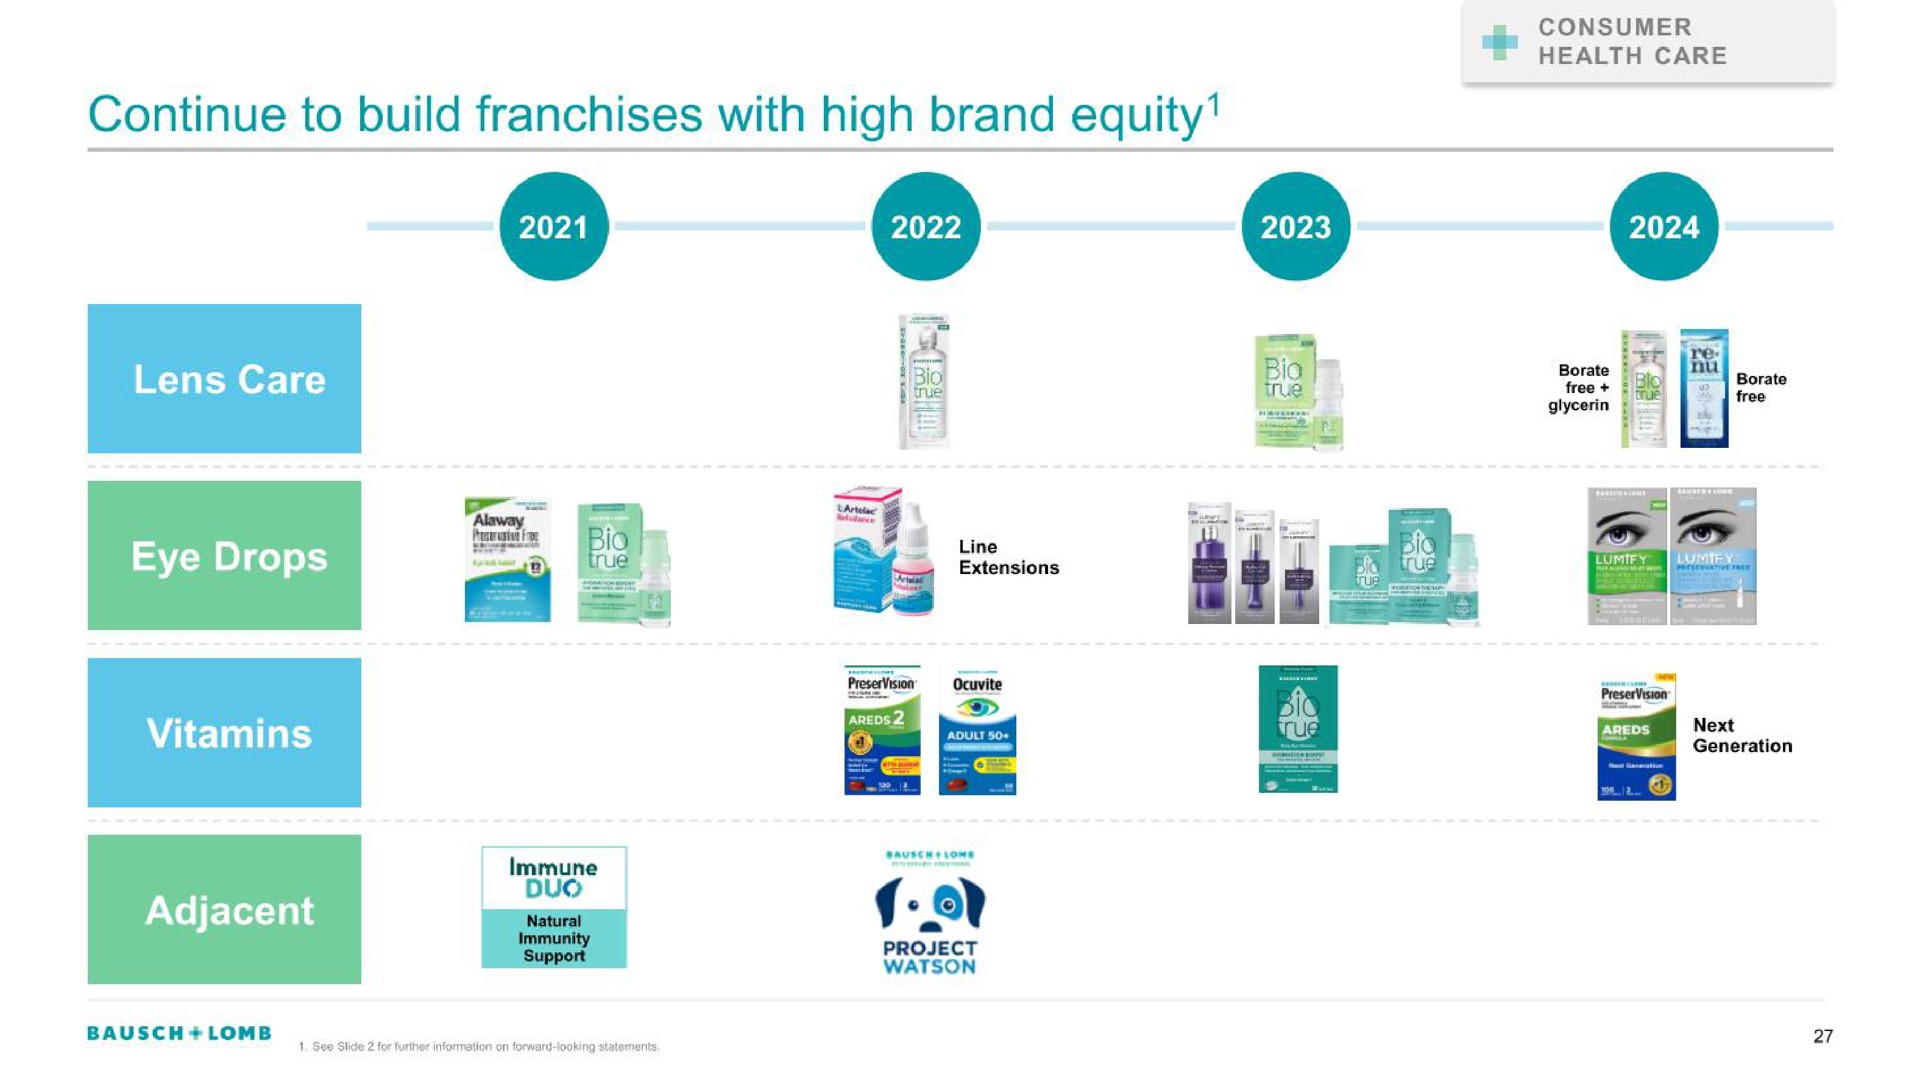 continue to build franchises with high brand equity pus | Bausch+Lomb